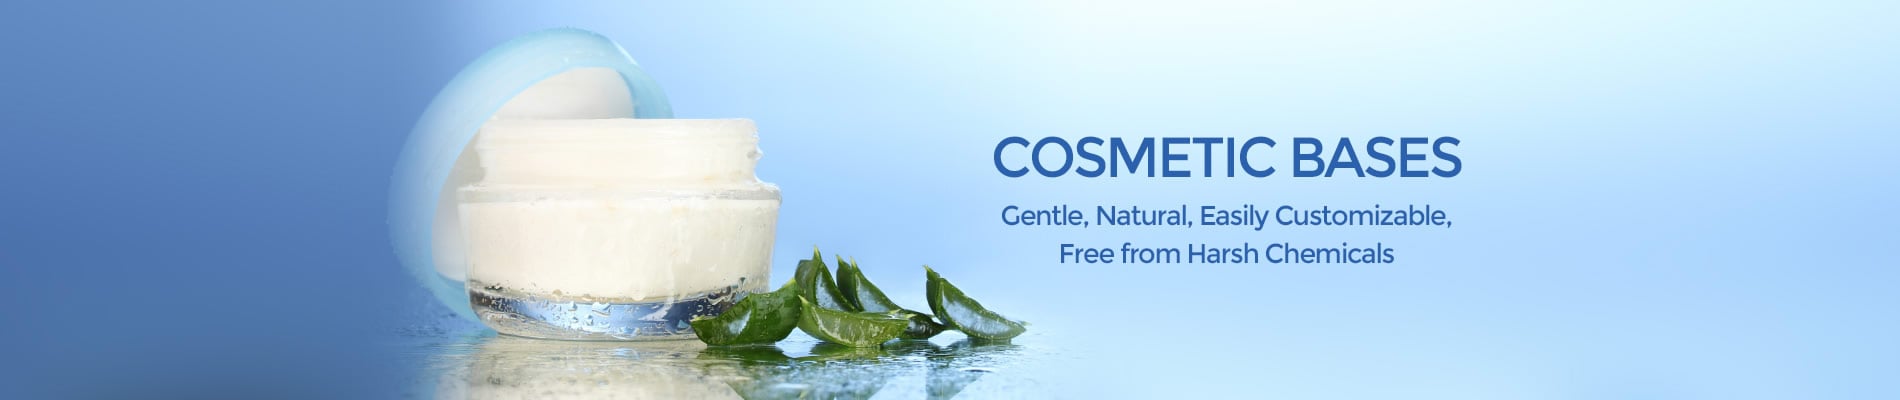 Cosmetic Bases at Wholesale Prices from New Directions Aromatics